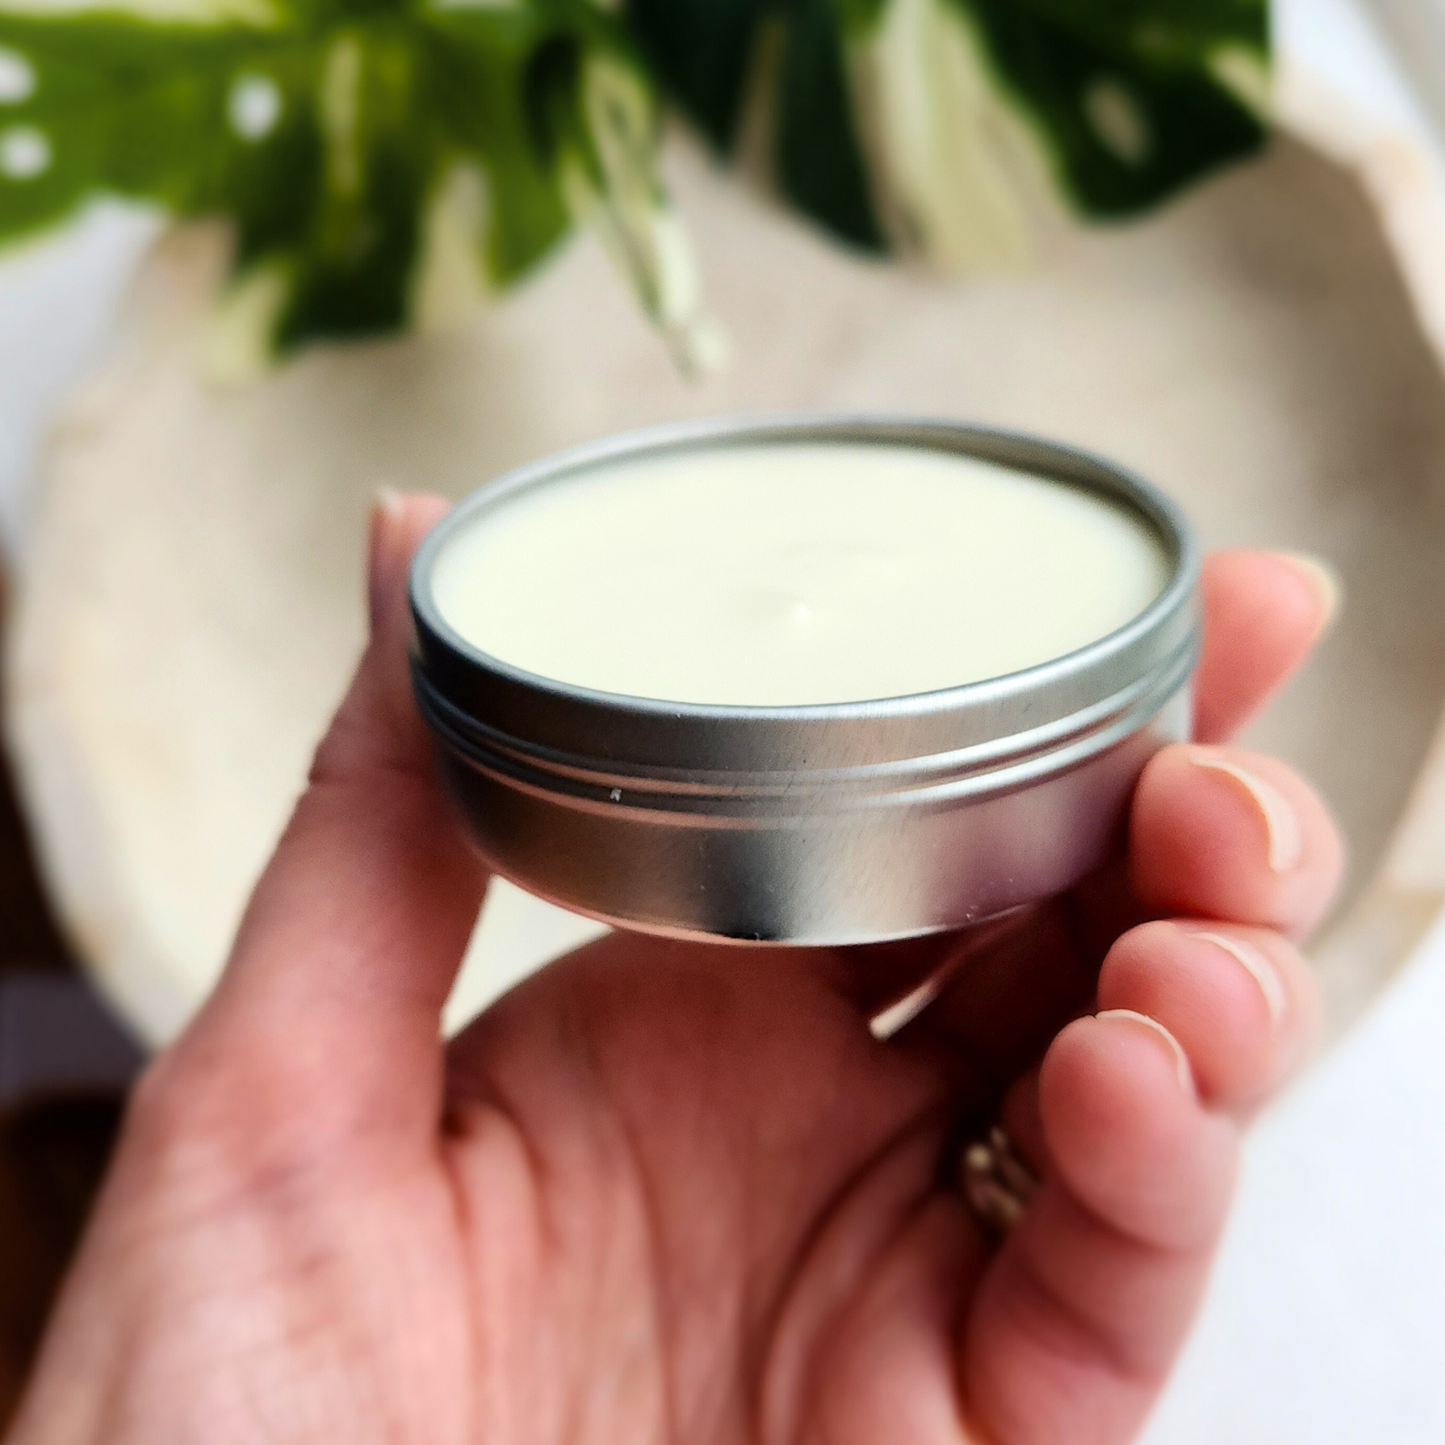 Nature Therapy Face Butter